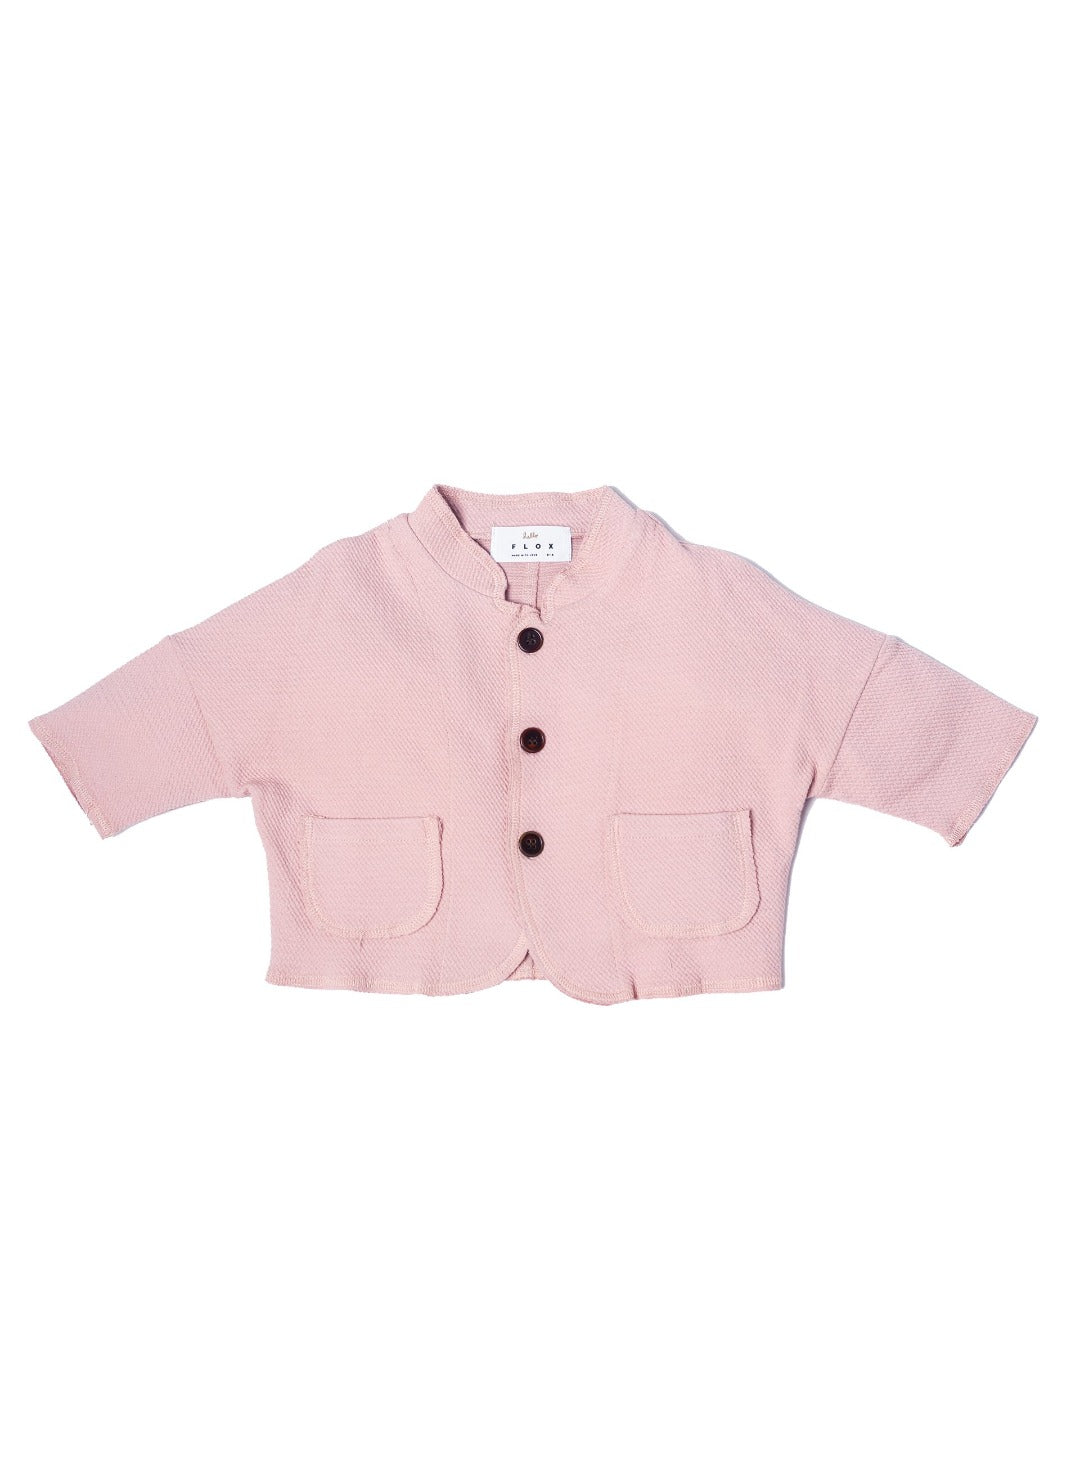 rose pink cardigan with black buttons